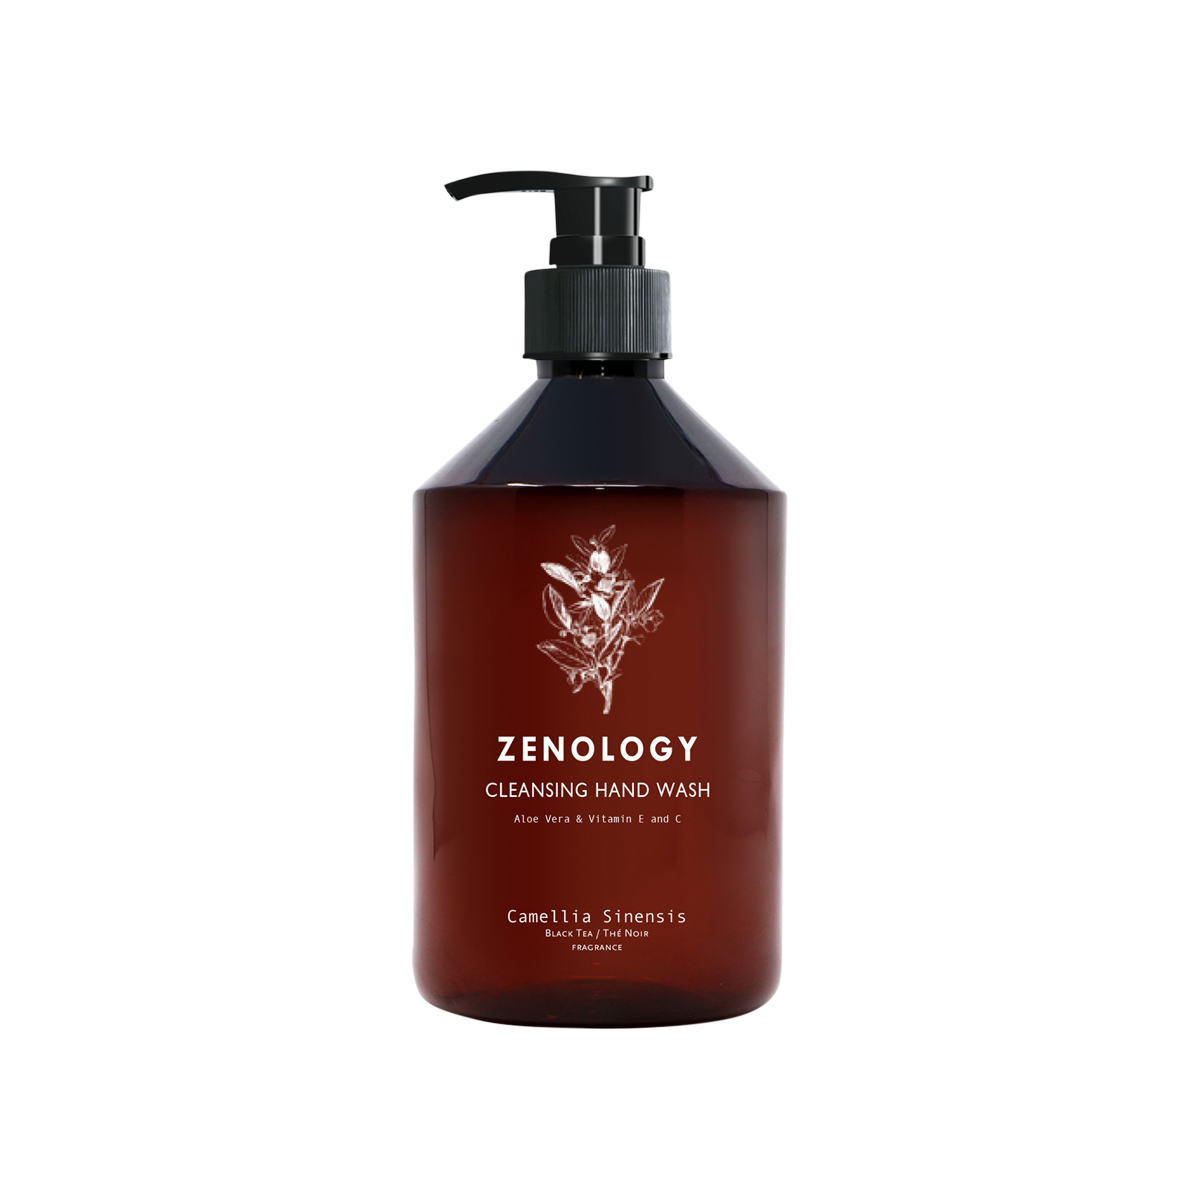 Zenology - Camellia Sinensis Cleansing Hand Wash